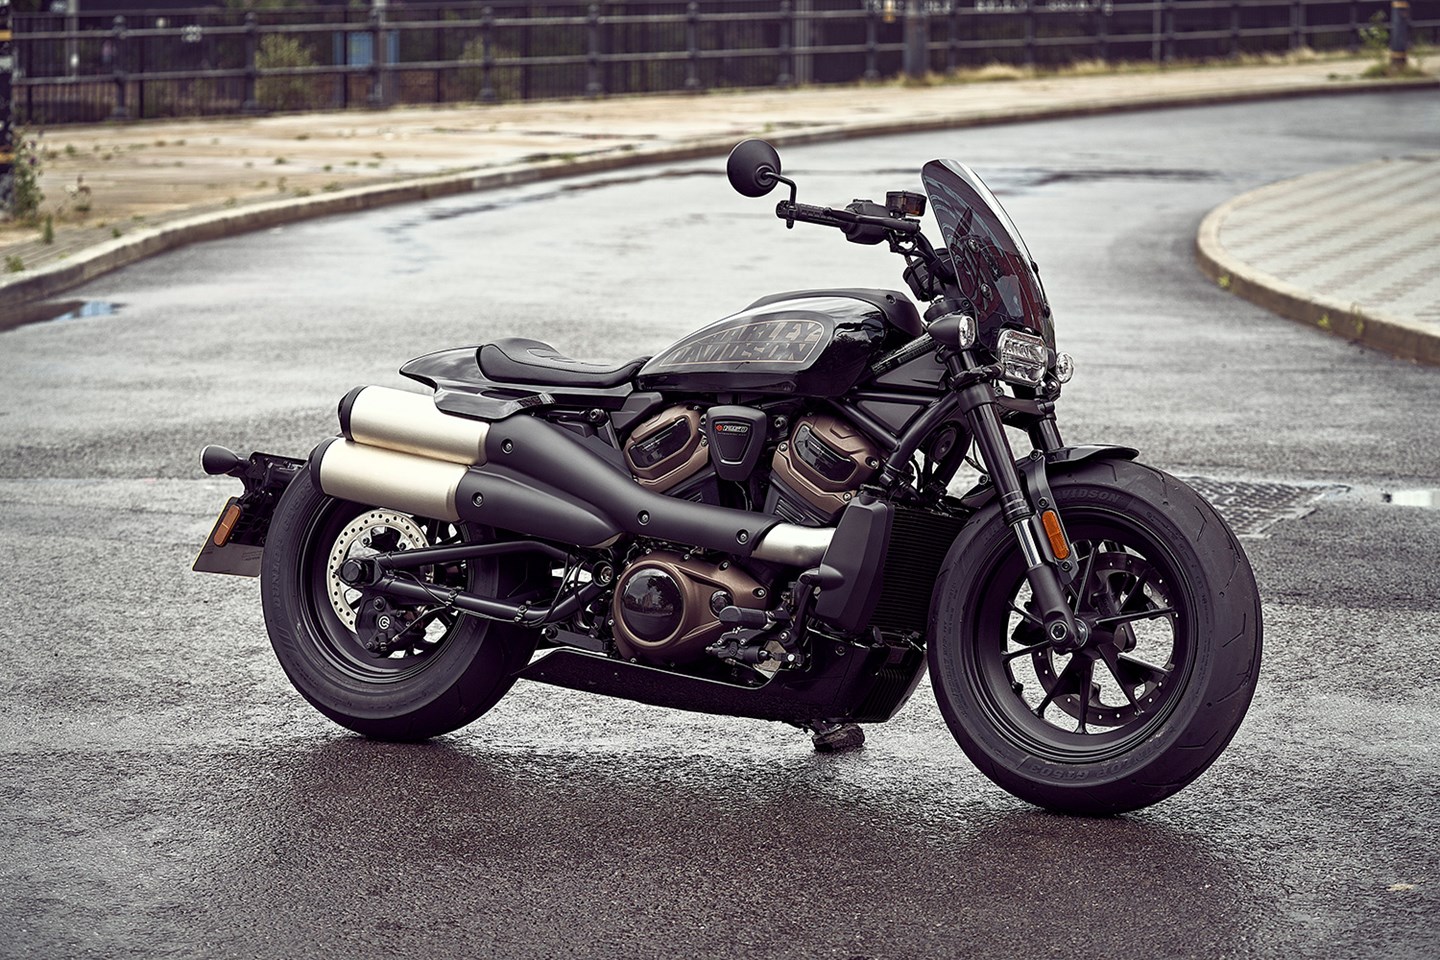 2021 Harley-Davidson Sportster S review, all-new H-D